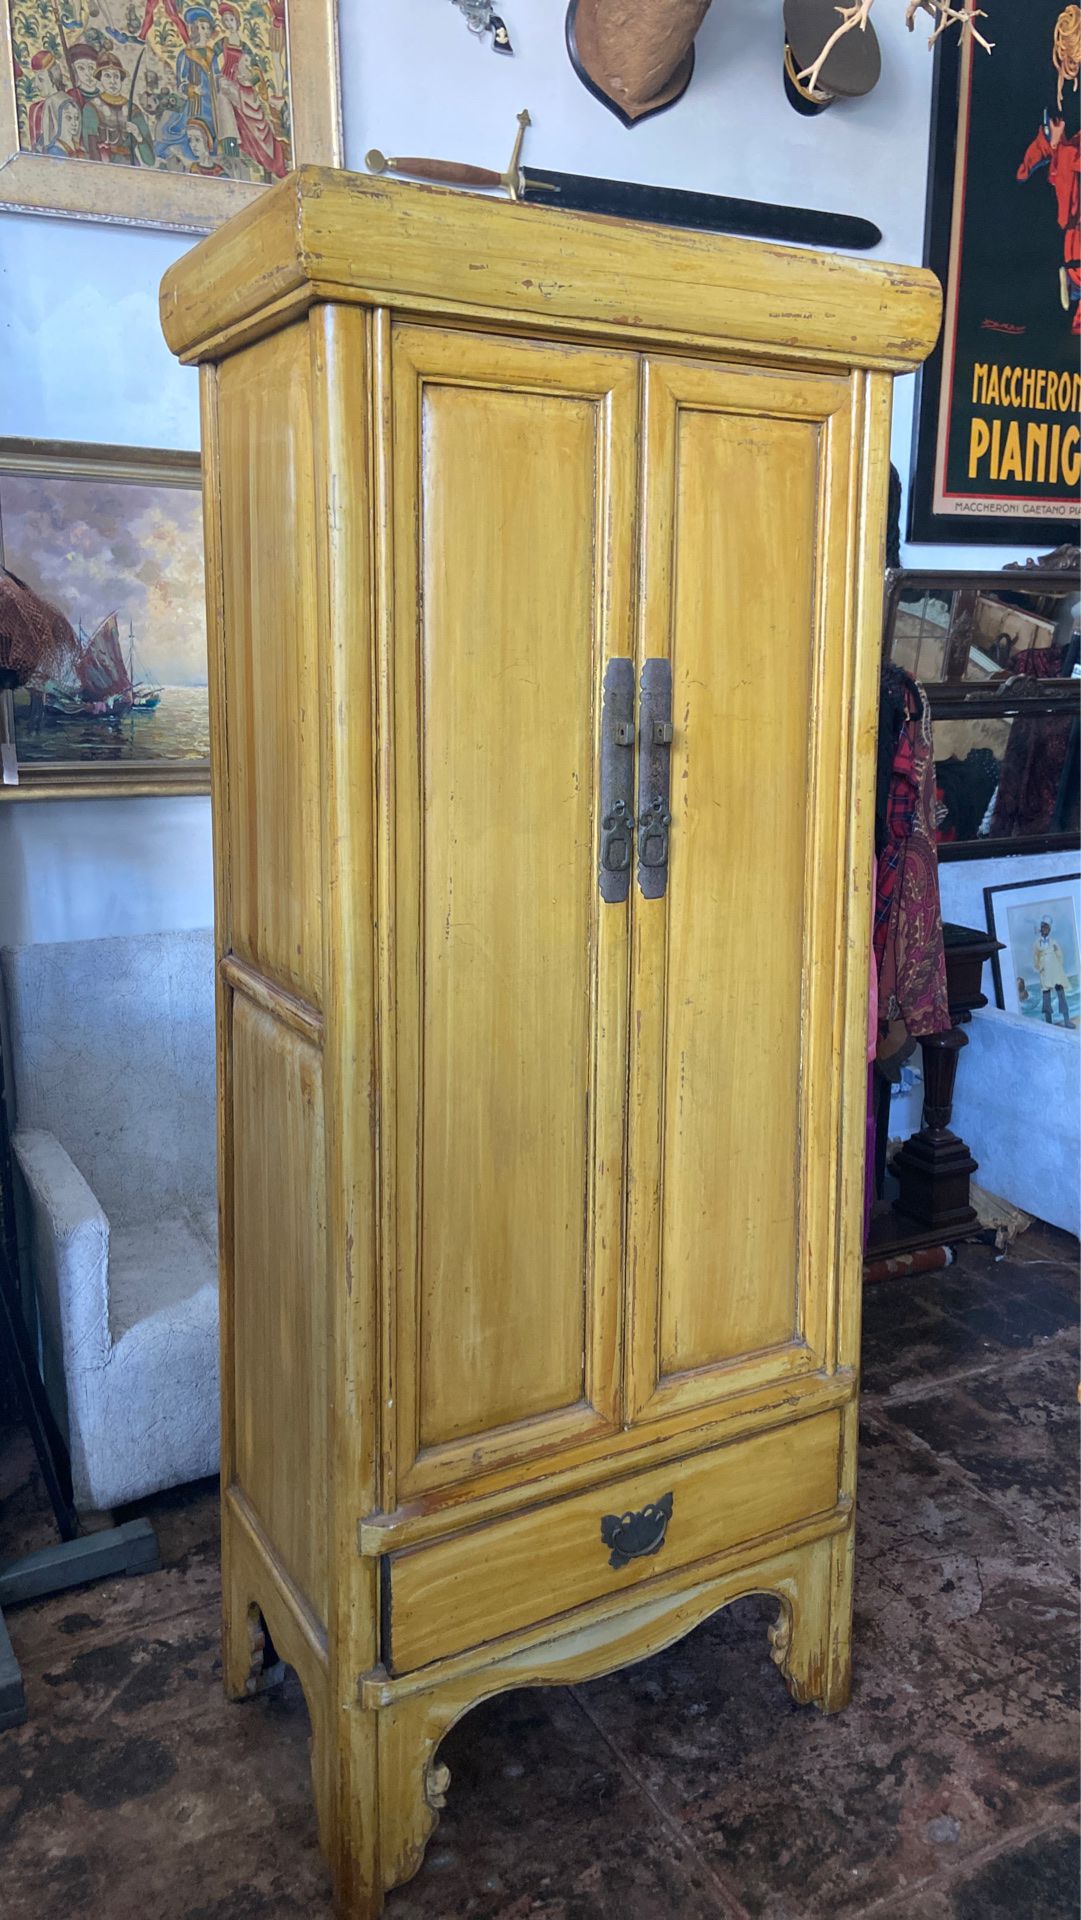 Antique yellow Chinese armoire